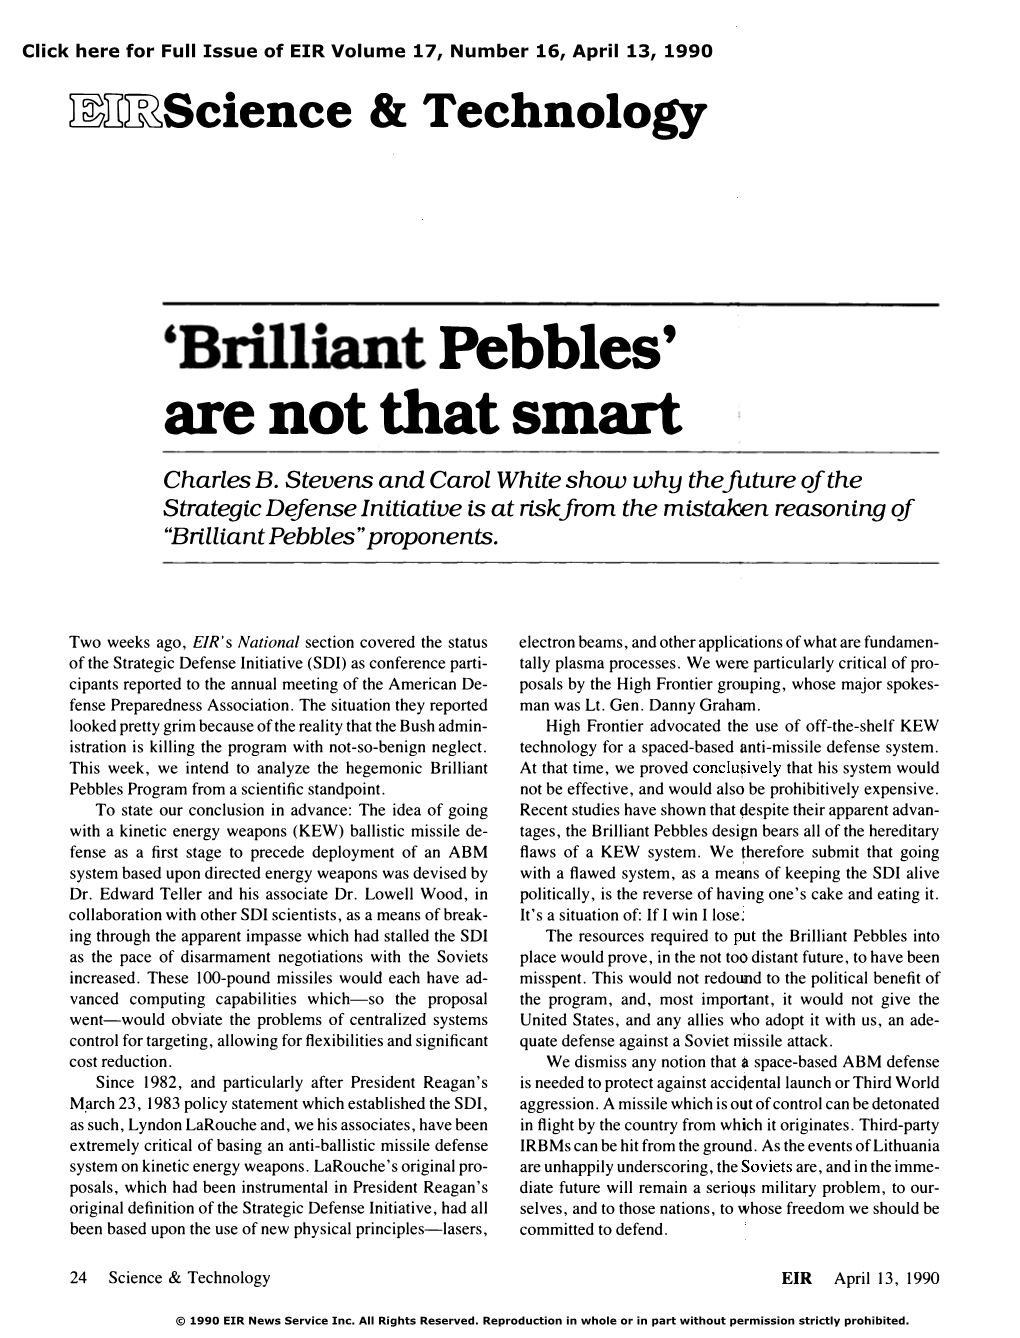 'Brilliant Pebbles' Are Not That Smart